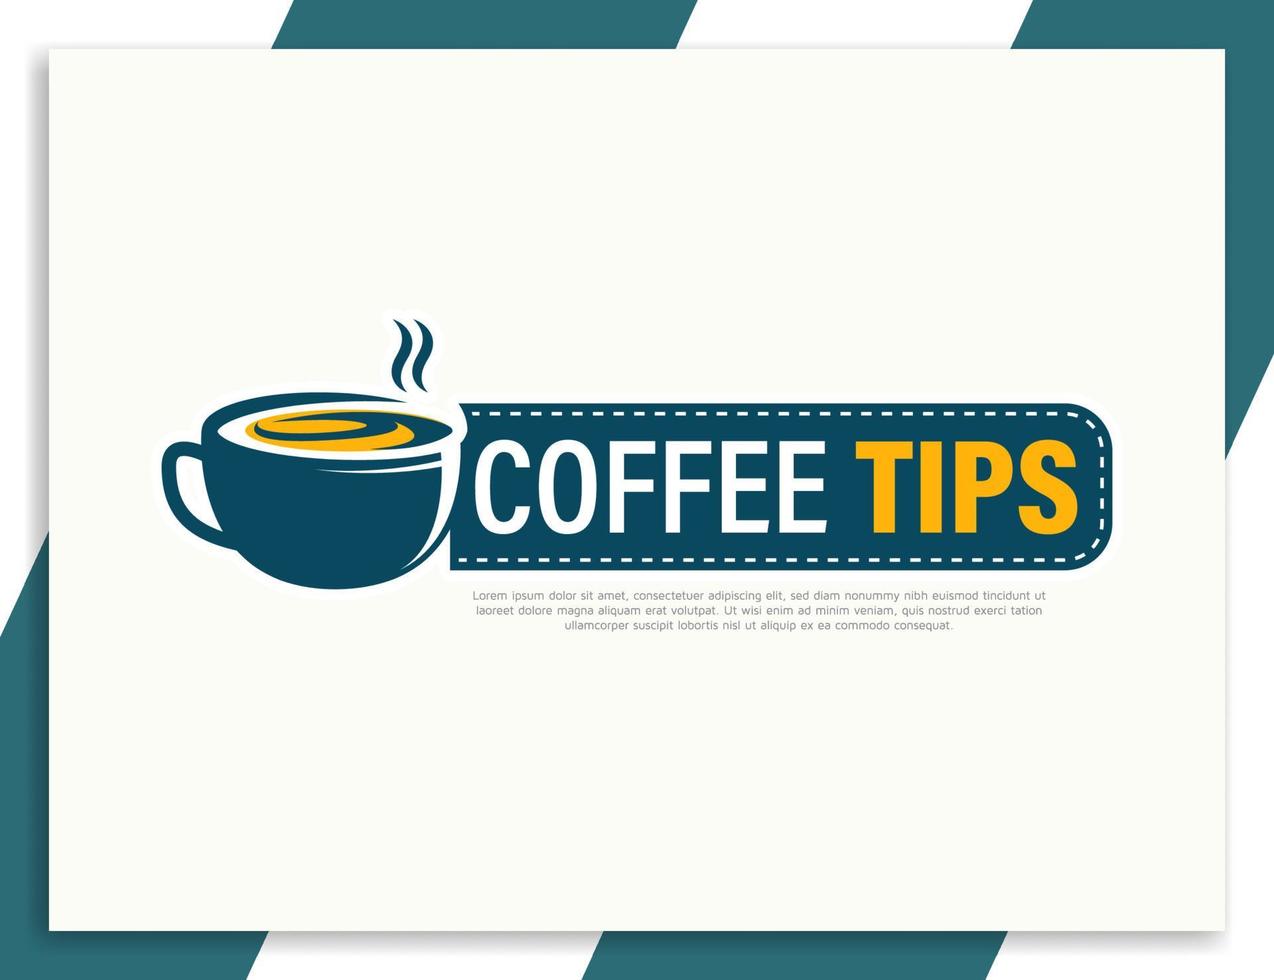 Coffee inspiration tips banner design template with think idea concept vector